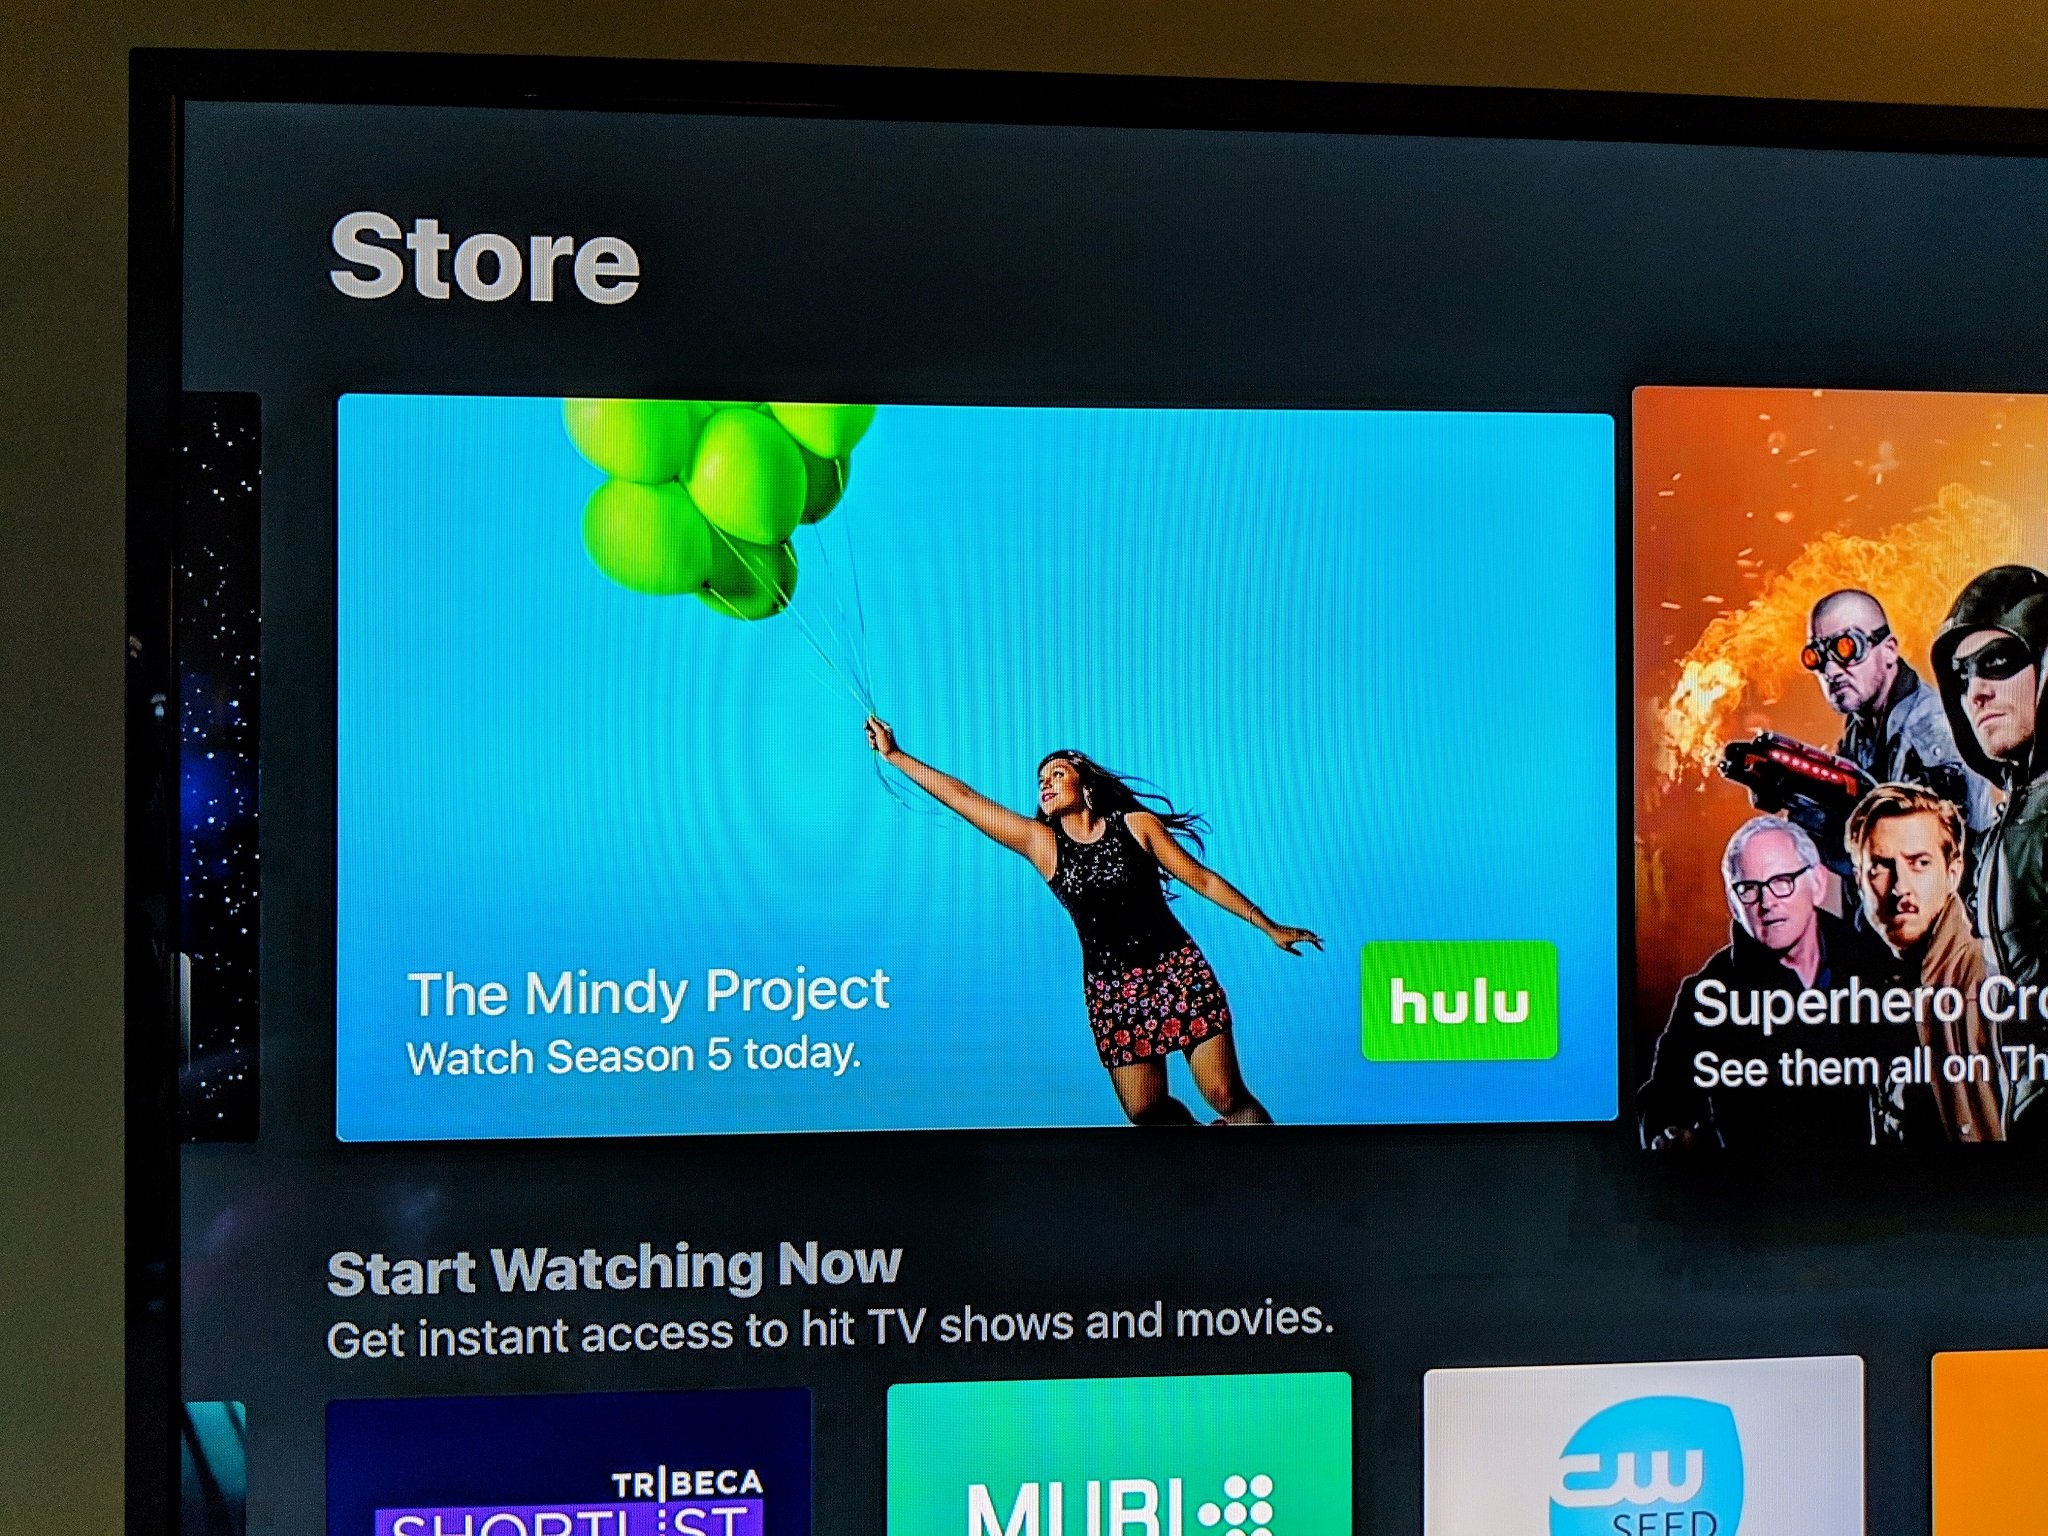 jord Michelangelo halv otte Is Hulu available on Apple TV? | What to Watch